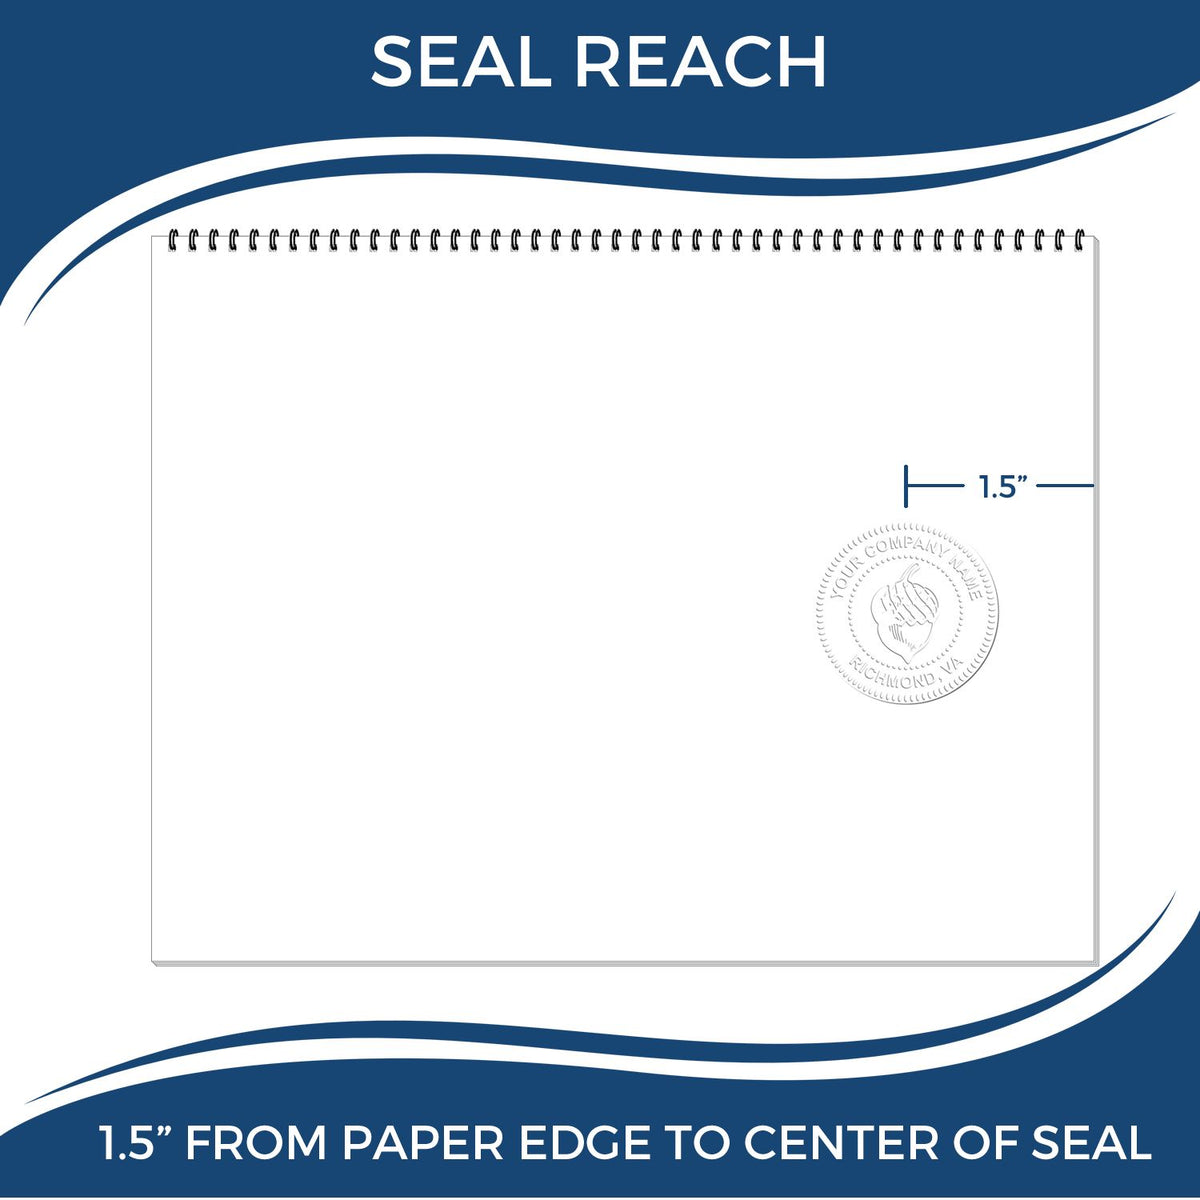 An infographic showing the seal reach which is represented by a ruler and a miniature seal image of the Handheld Arizona Professional Geologist Embosser